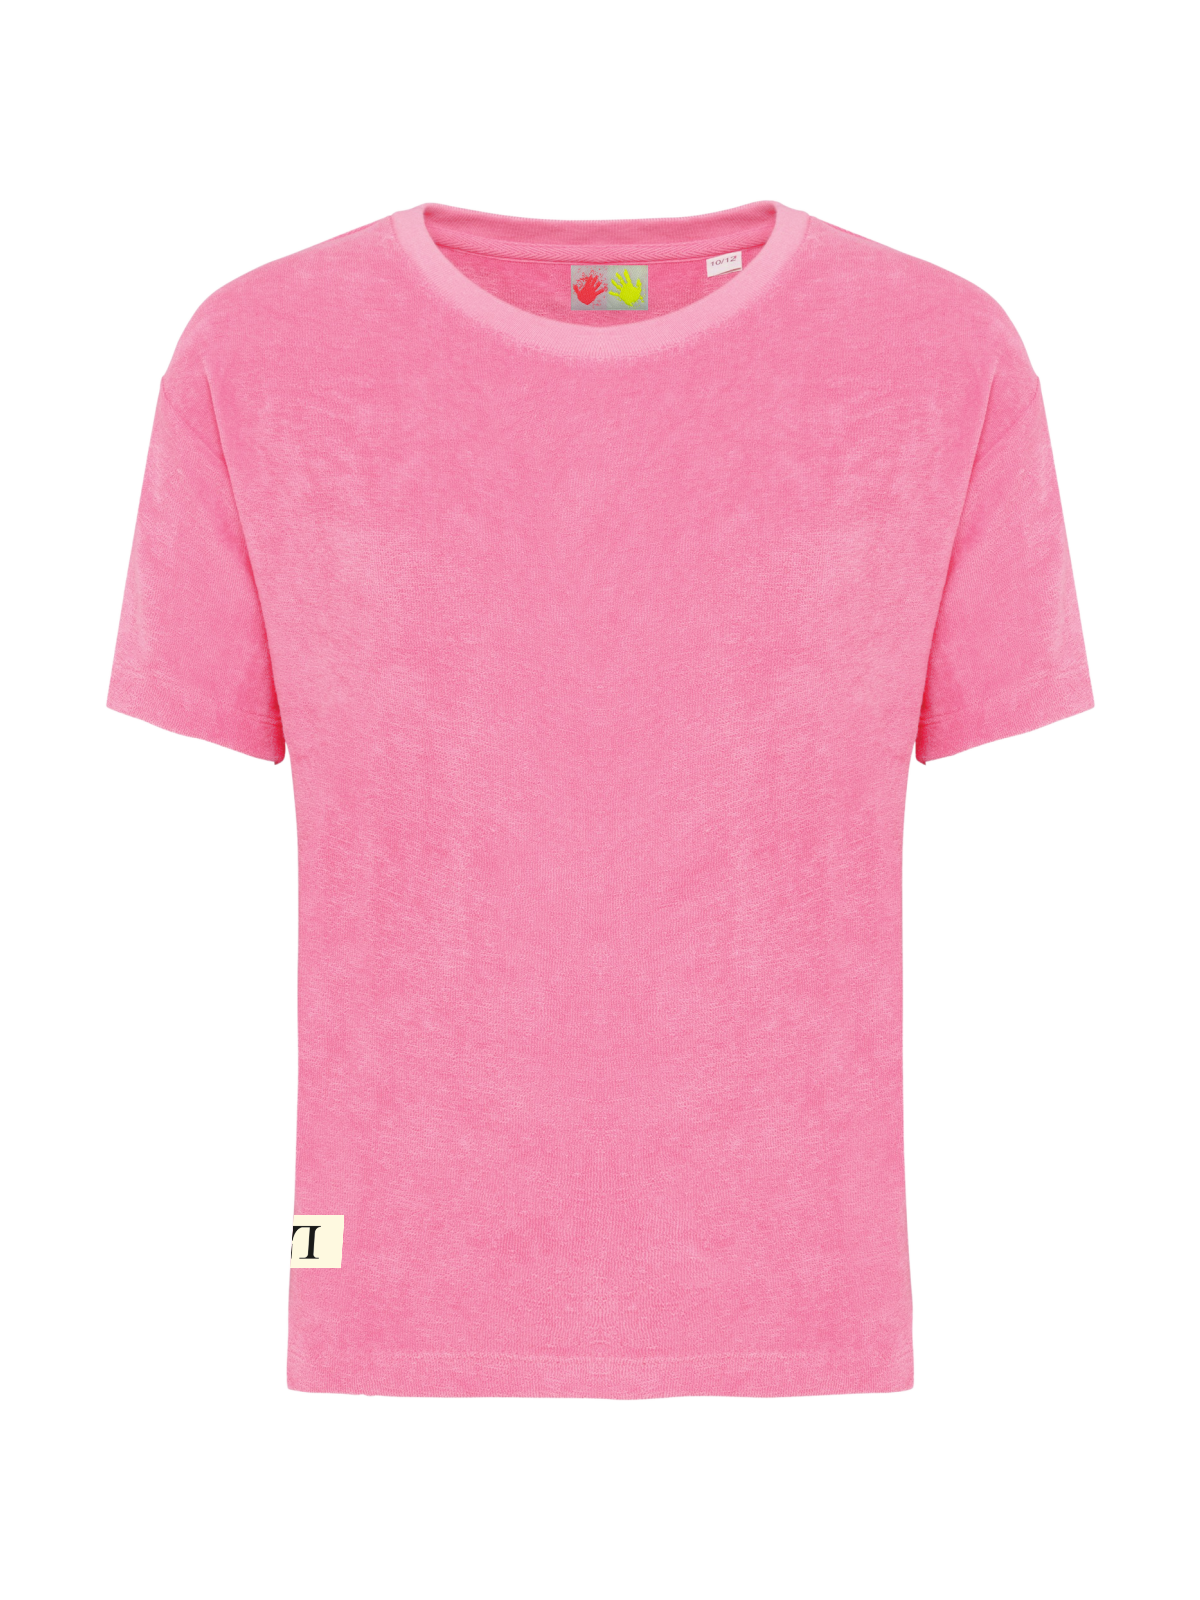 LL Girly Terry Towel-T-Shirt candy